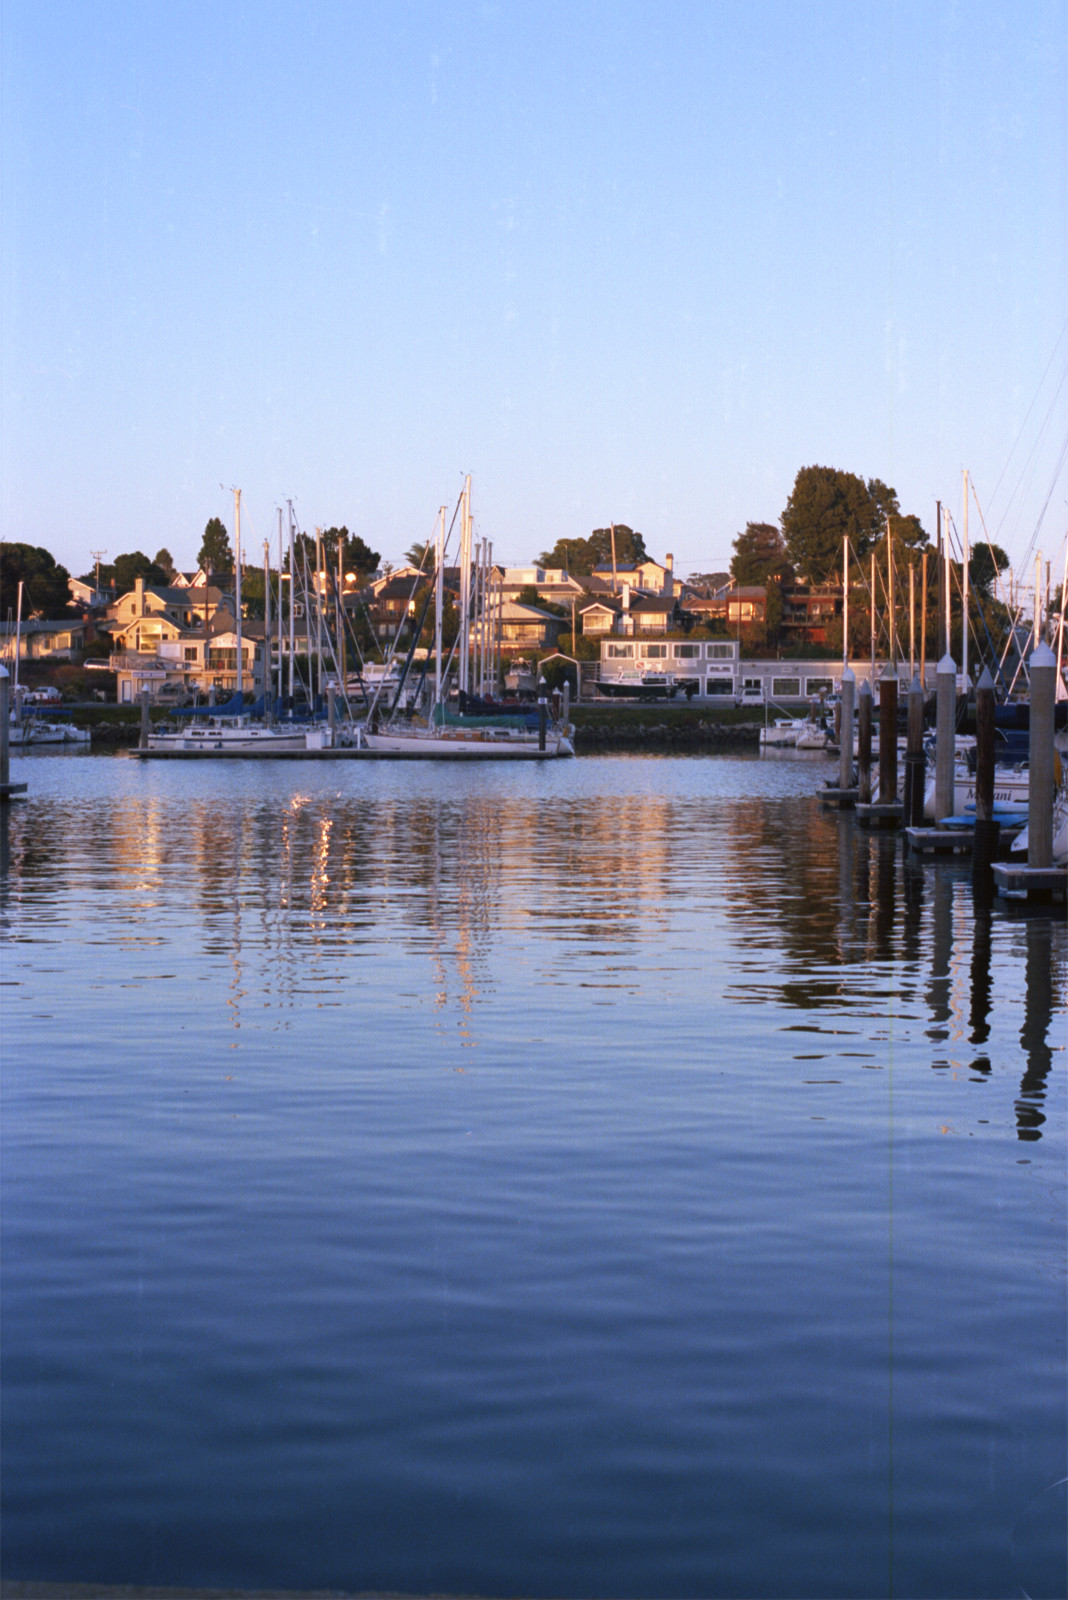 Reflections of the golden sunset on the water and on the houses standing on the far side of Santa Cruz Yacht Harbor. The sky fittingly blue.